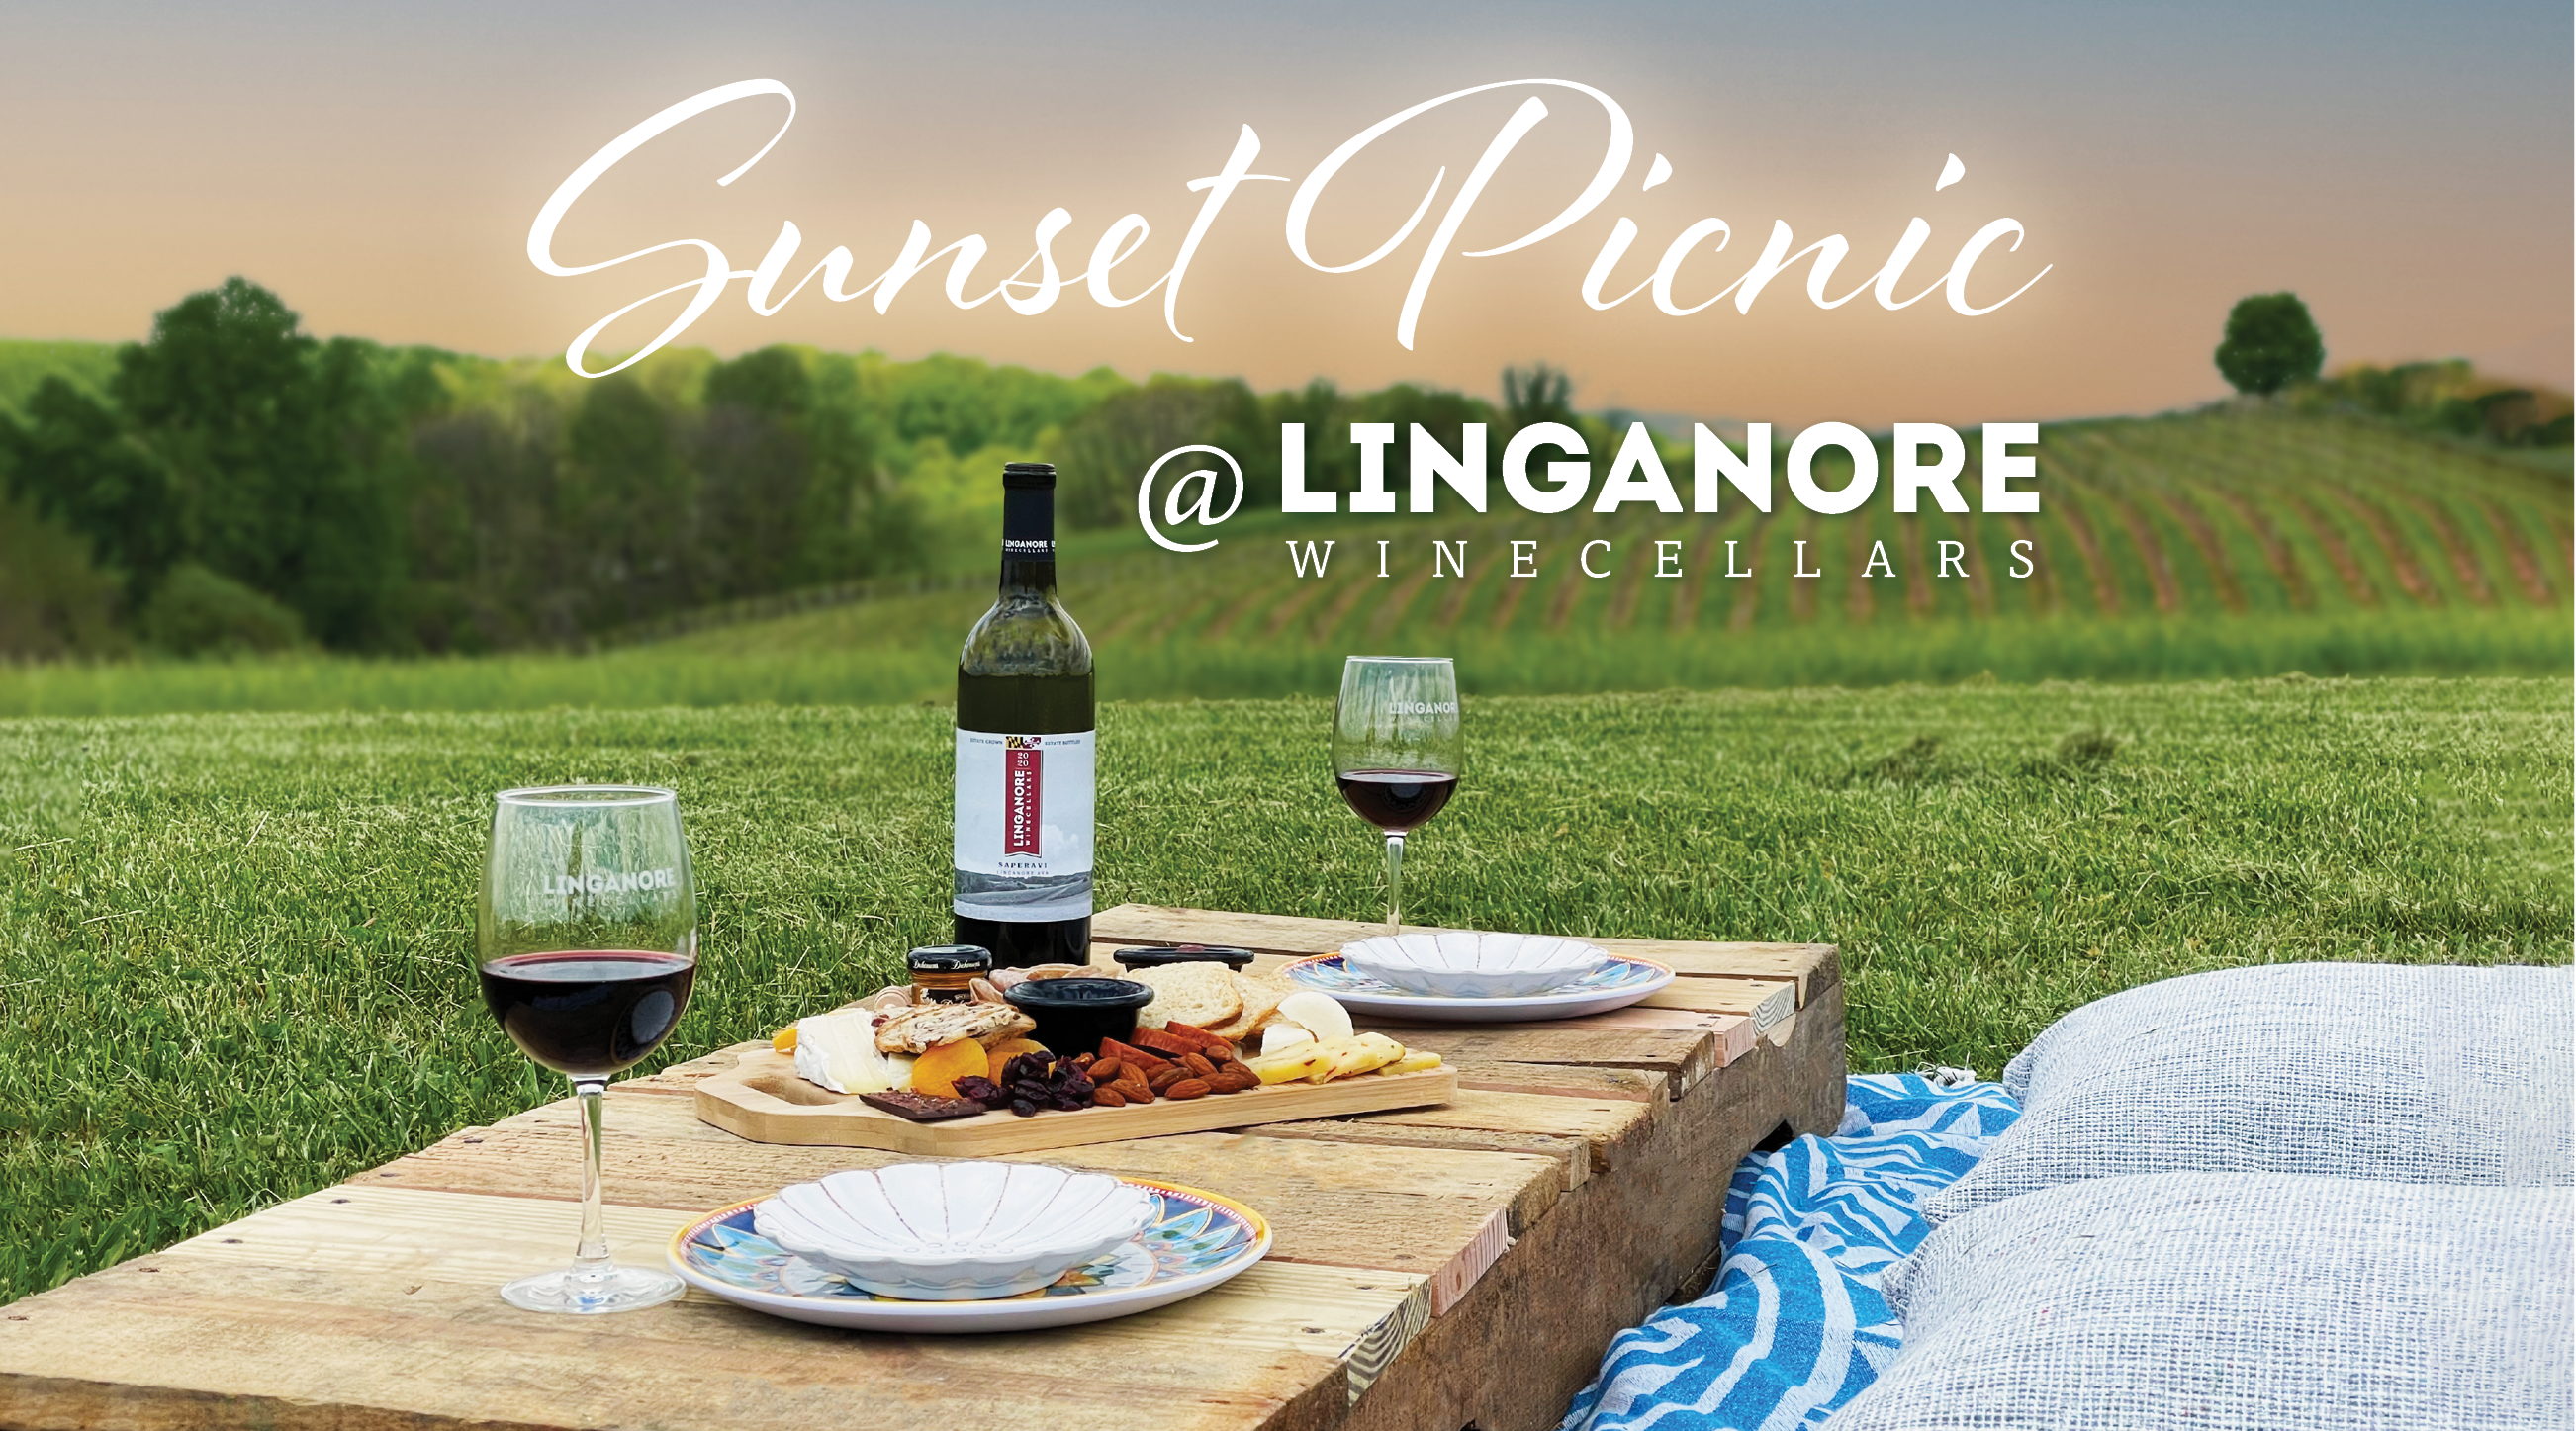 sunset picnic at linganore with red wine and charcuterie board